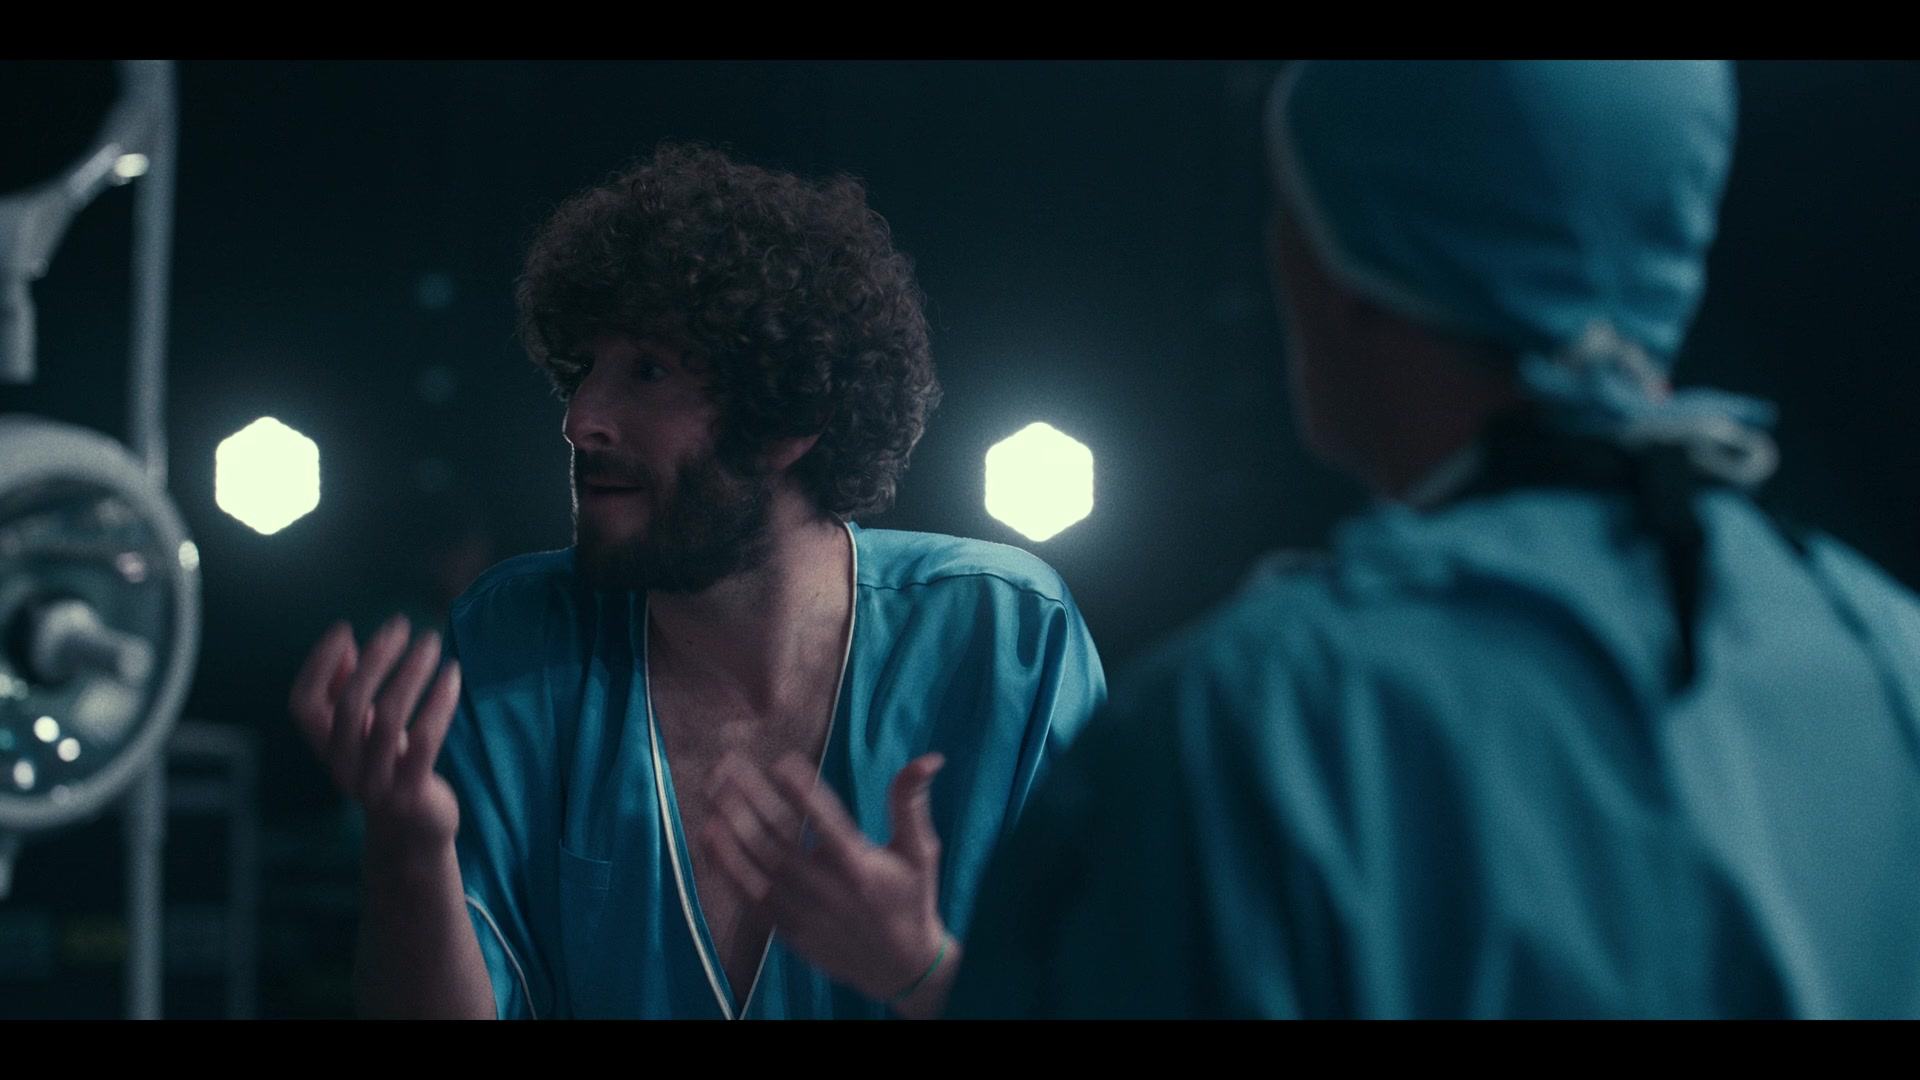 lil dicky full discography torrent